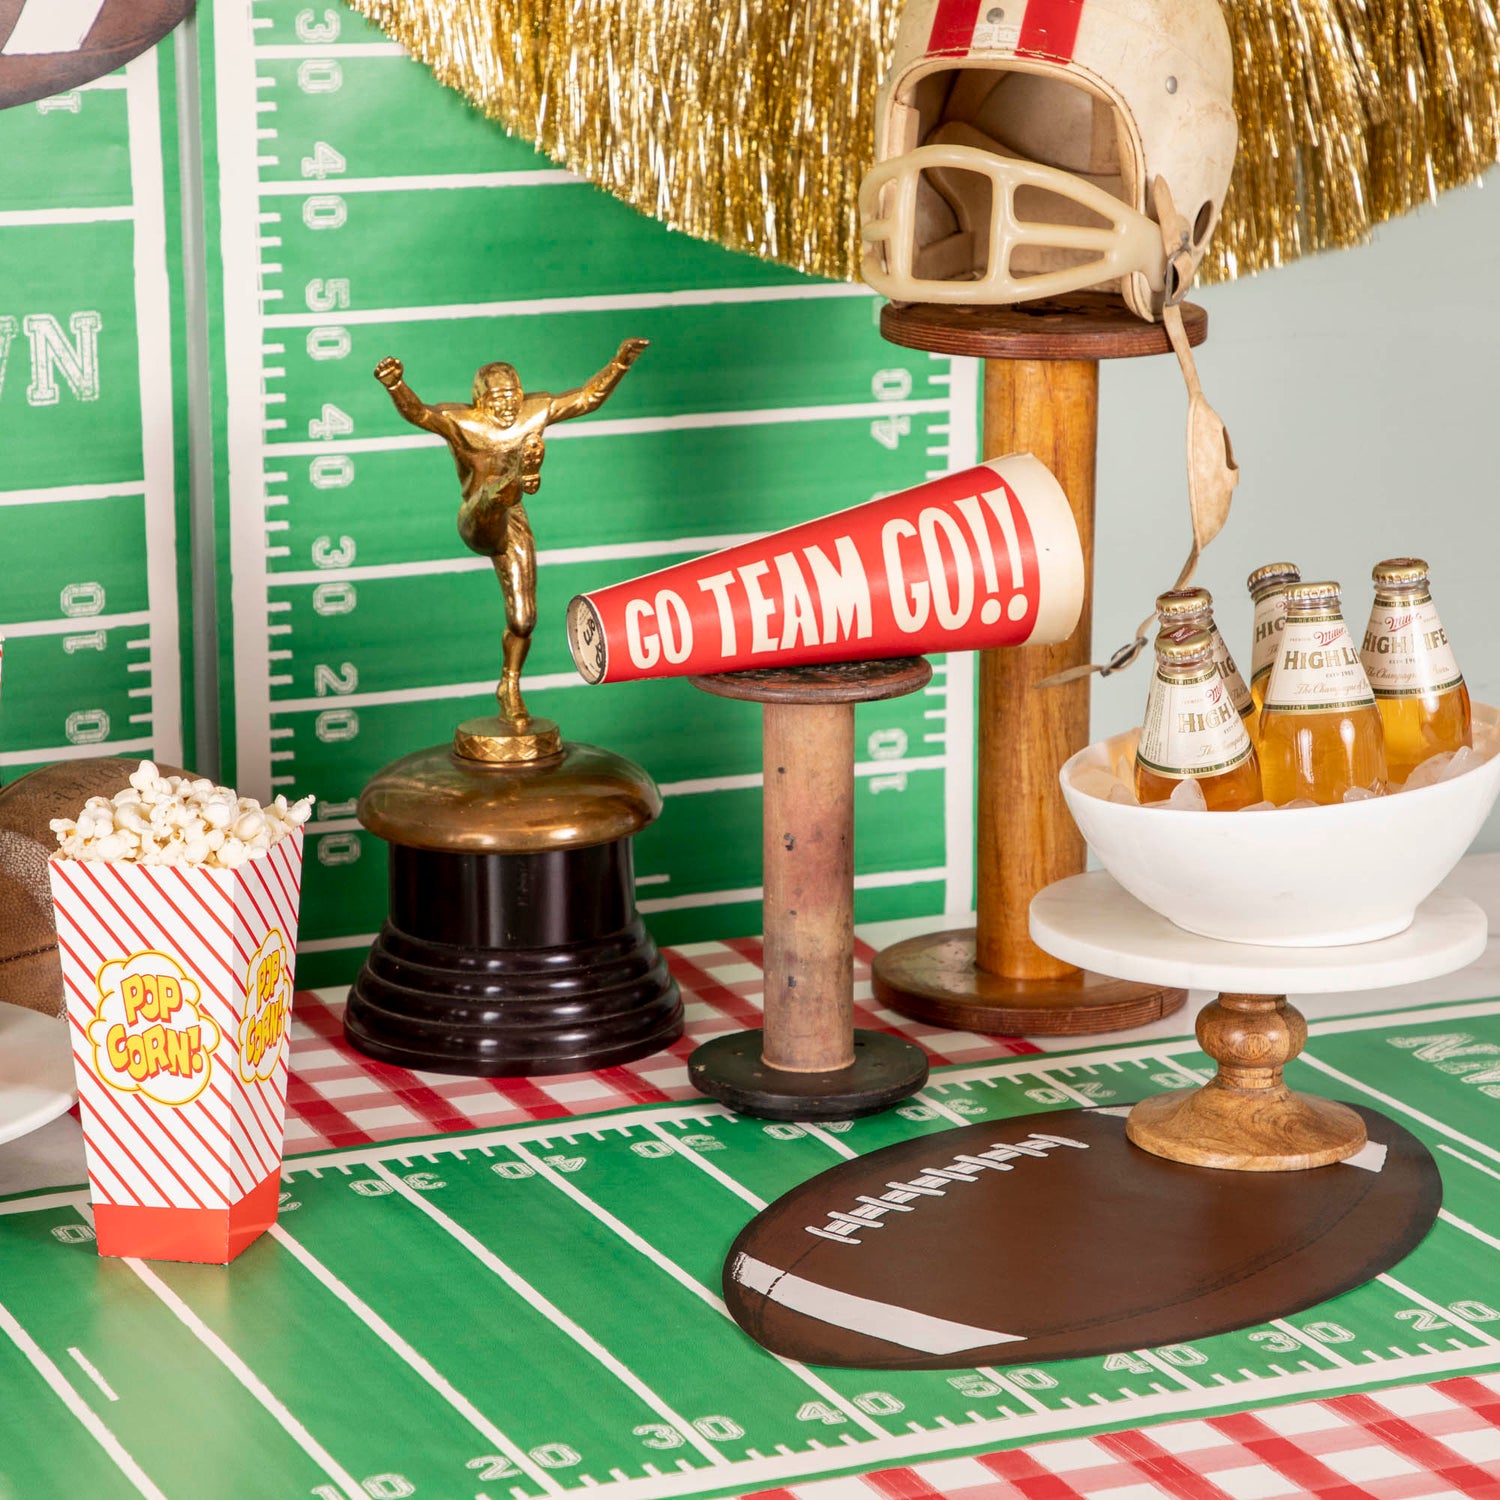 The Touchdown Runner used as a wall paper and table runner for a game day spread.